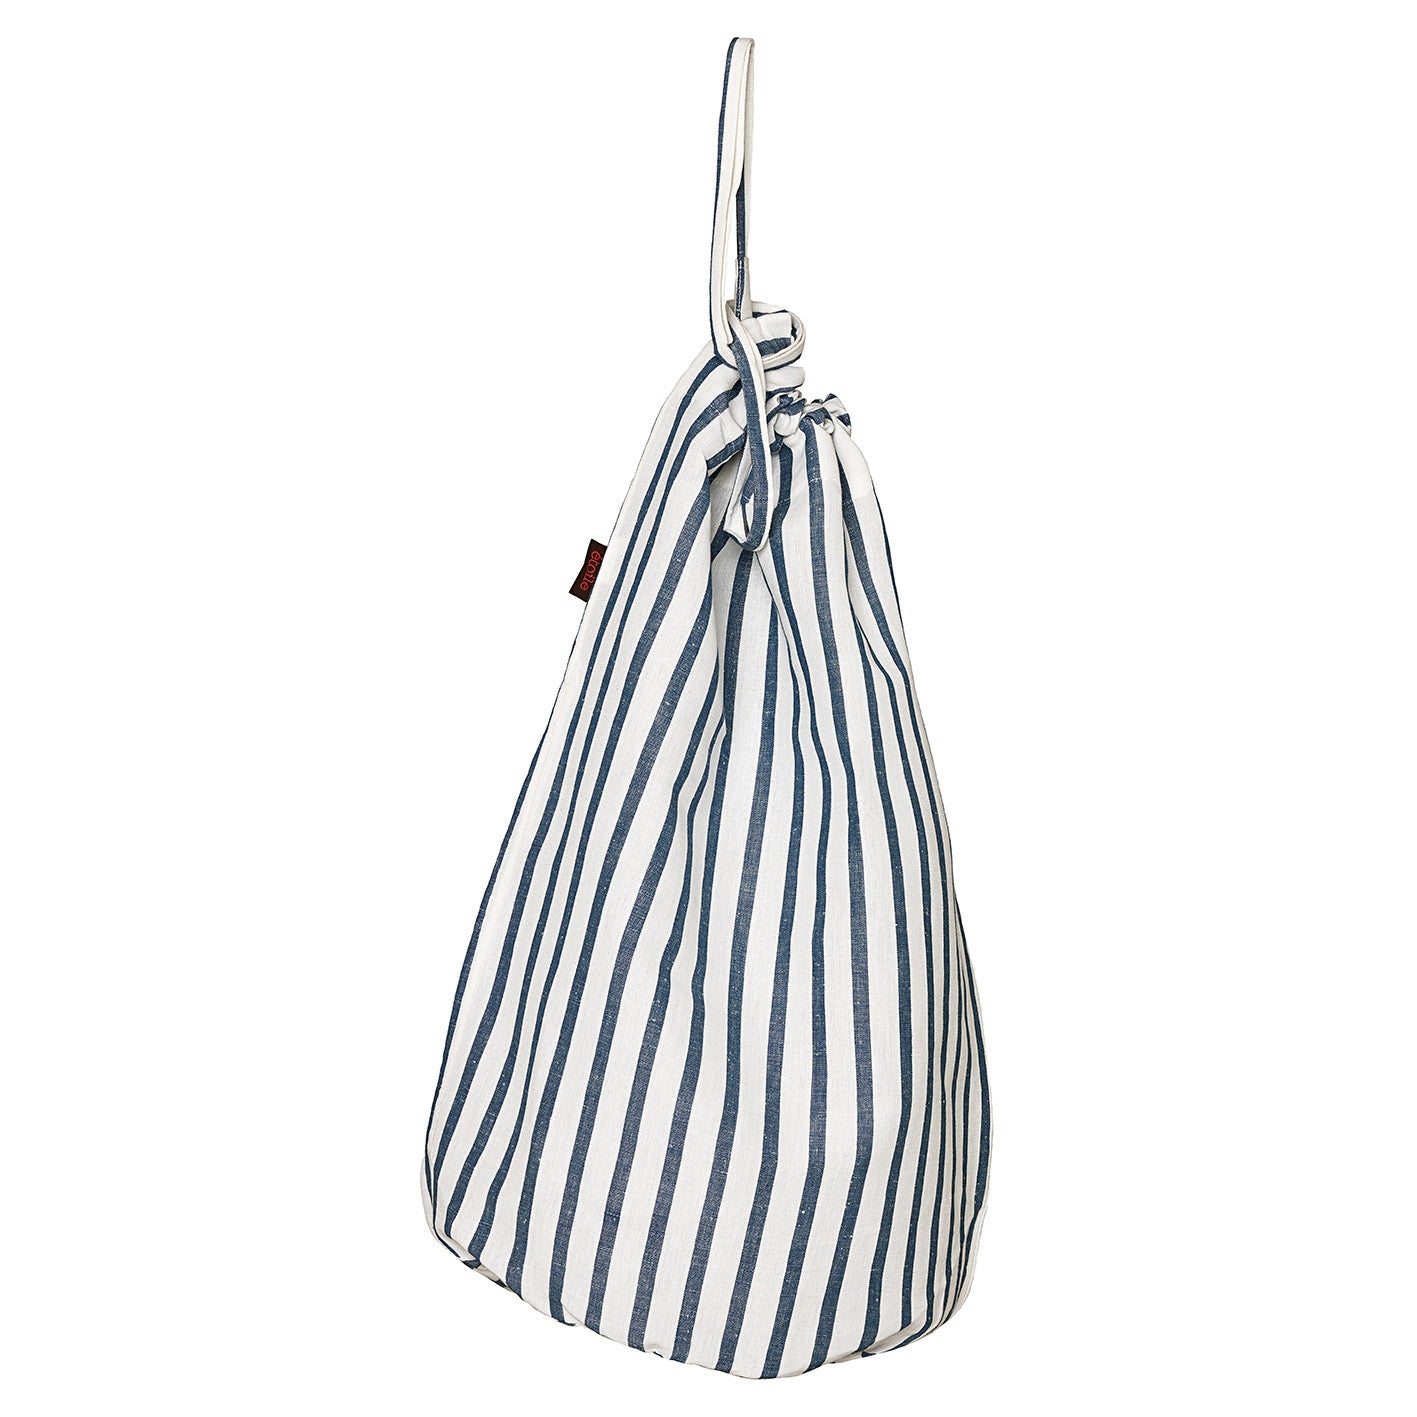 Autumn Ticking Stripe Cotton Linen Laundry and Storage Bags in Dark Petrol Blue ships from Canada (USA)